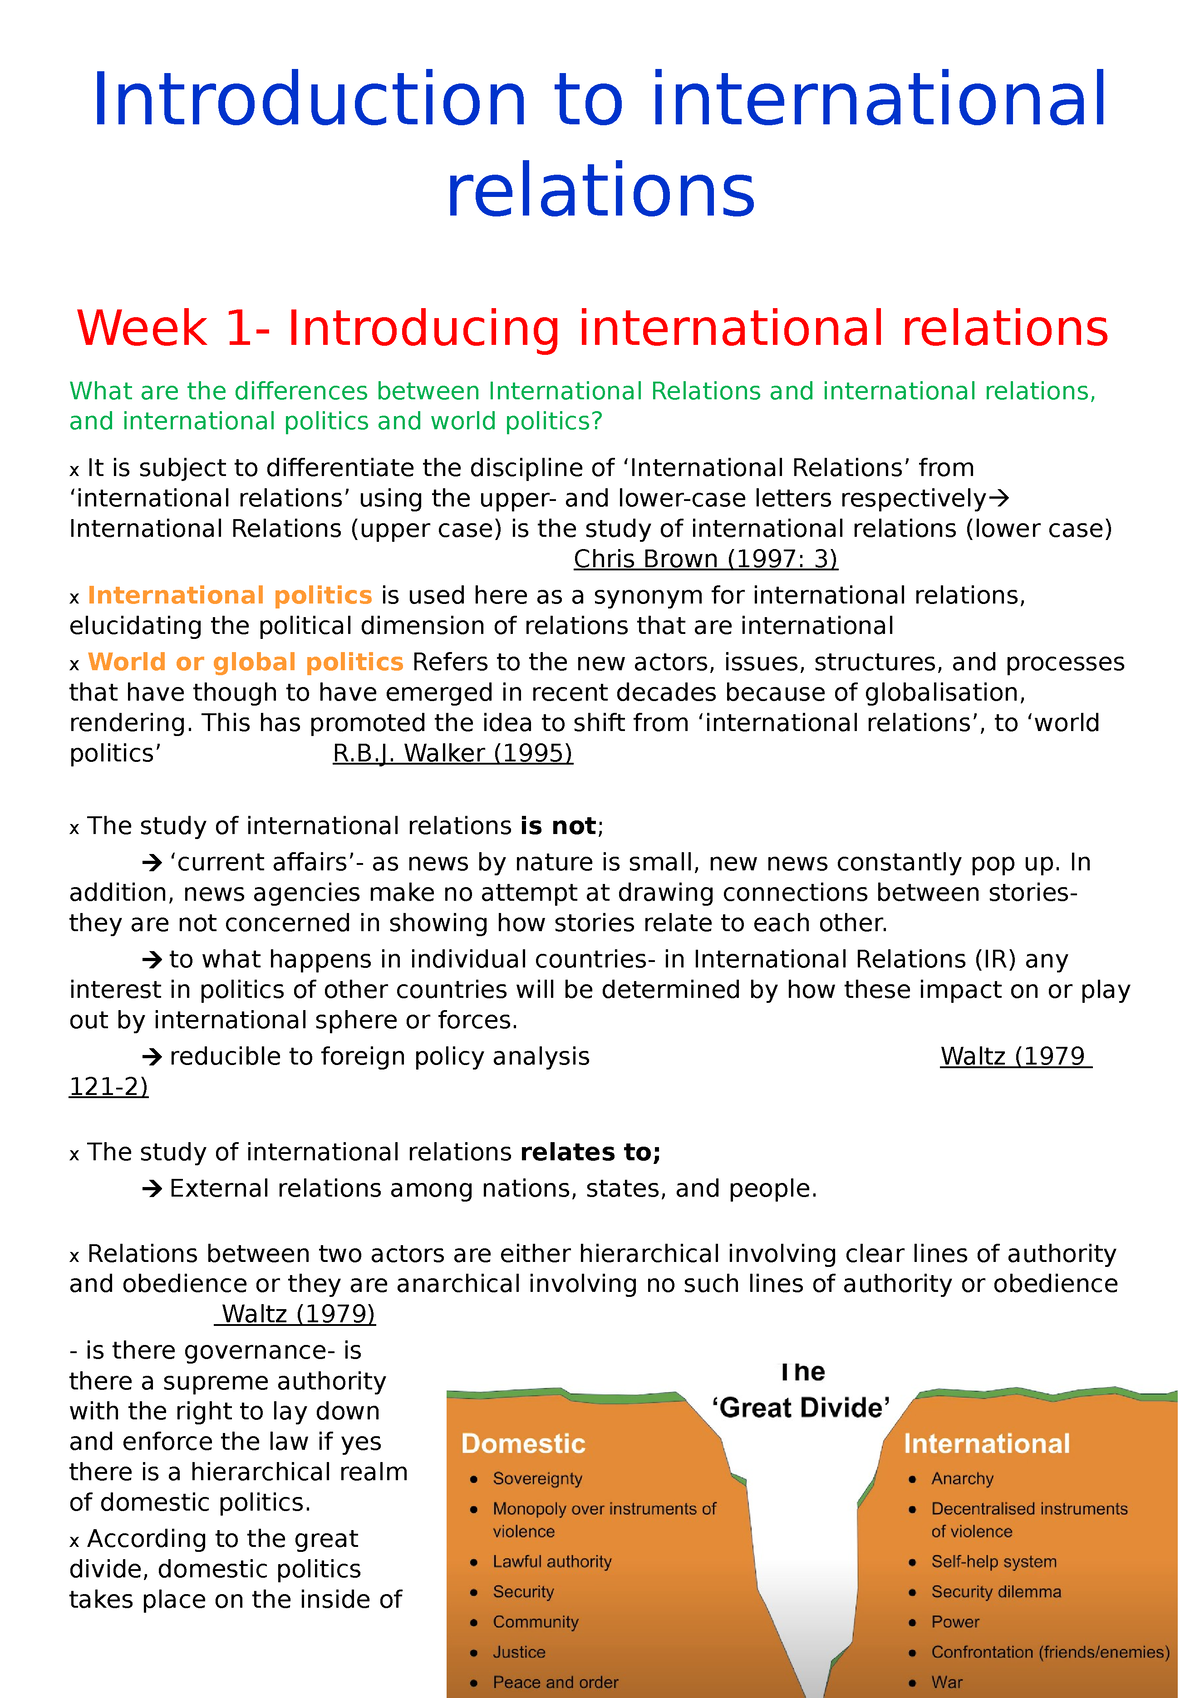 research topics related to international relations